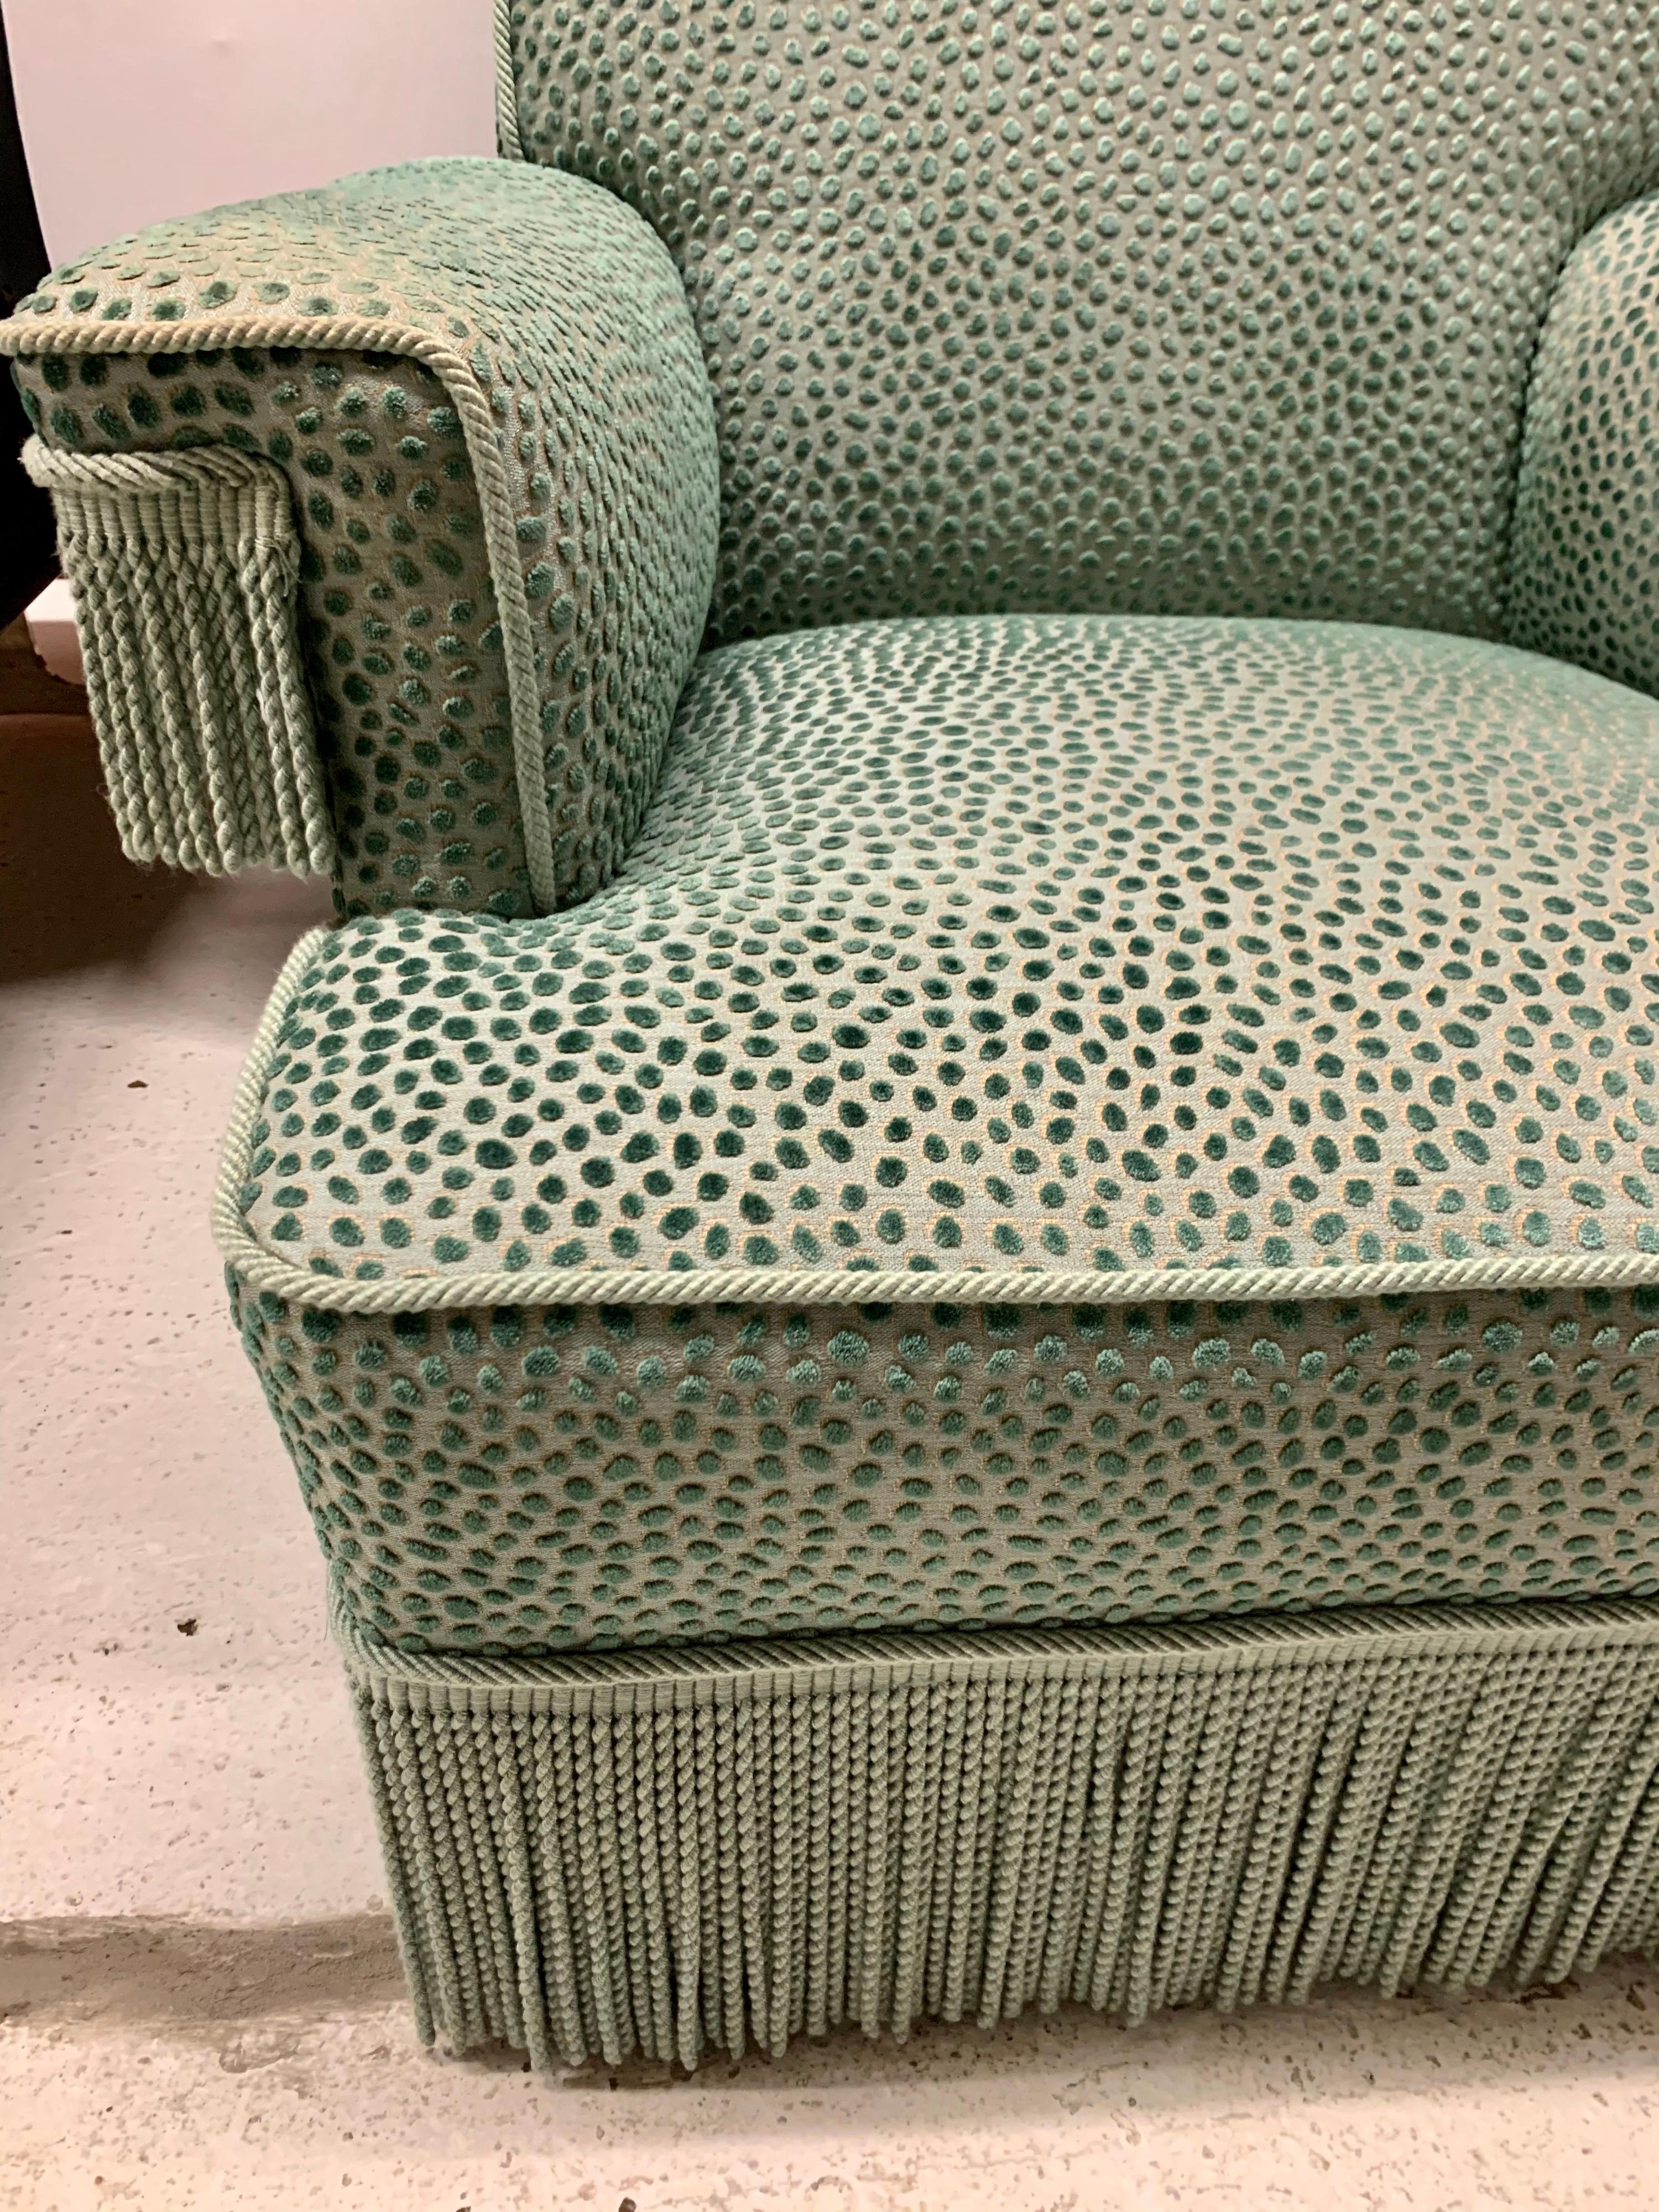 Regal pair of armchairs upholstered in a turquoise velvet fabric with a raised dot pattern. Bottom and arms of chairs have a coordinating buillion fringe.